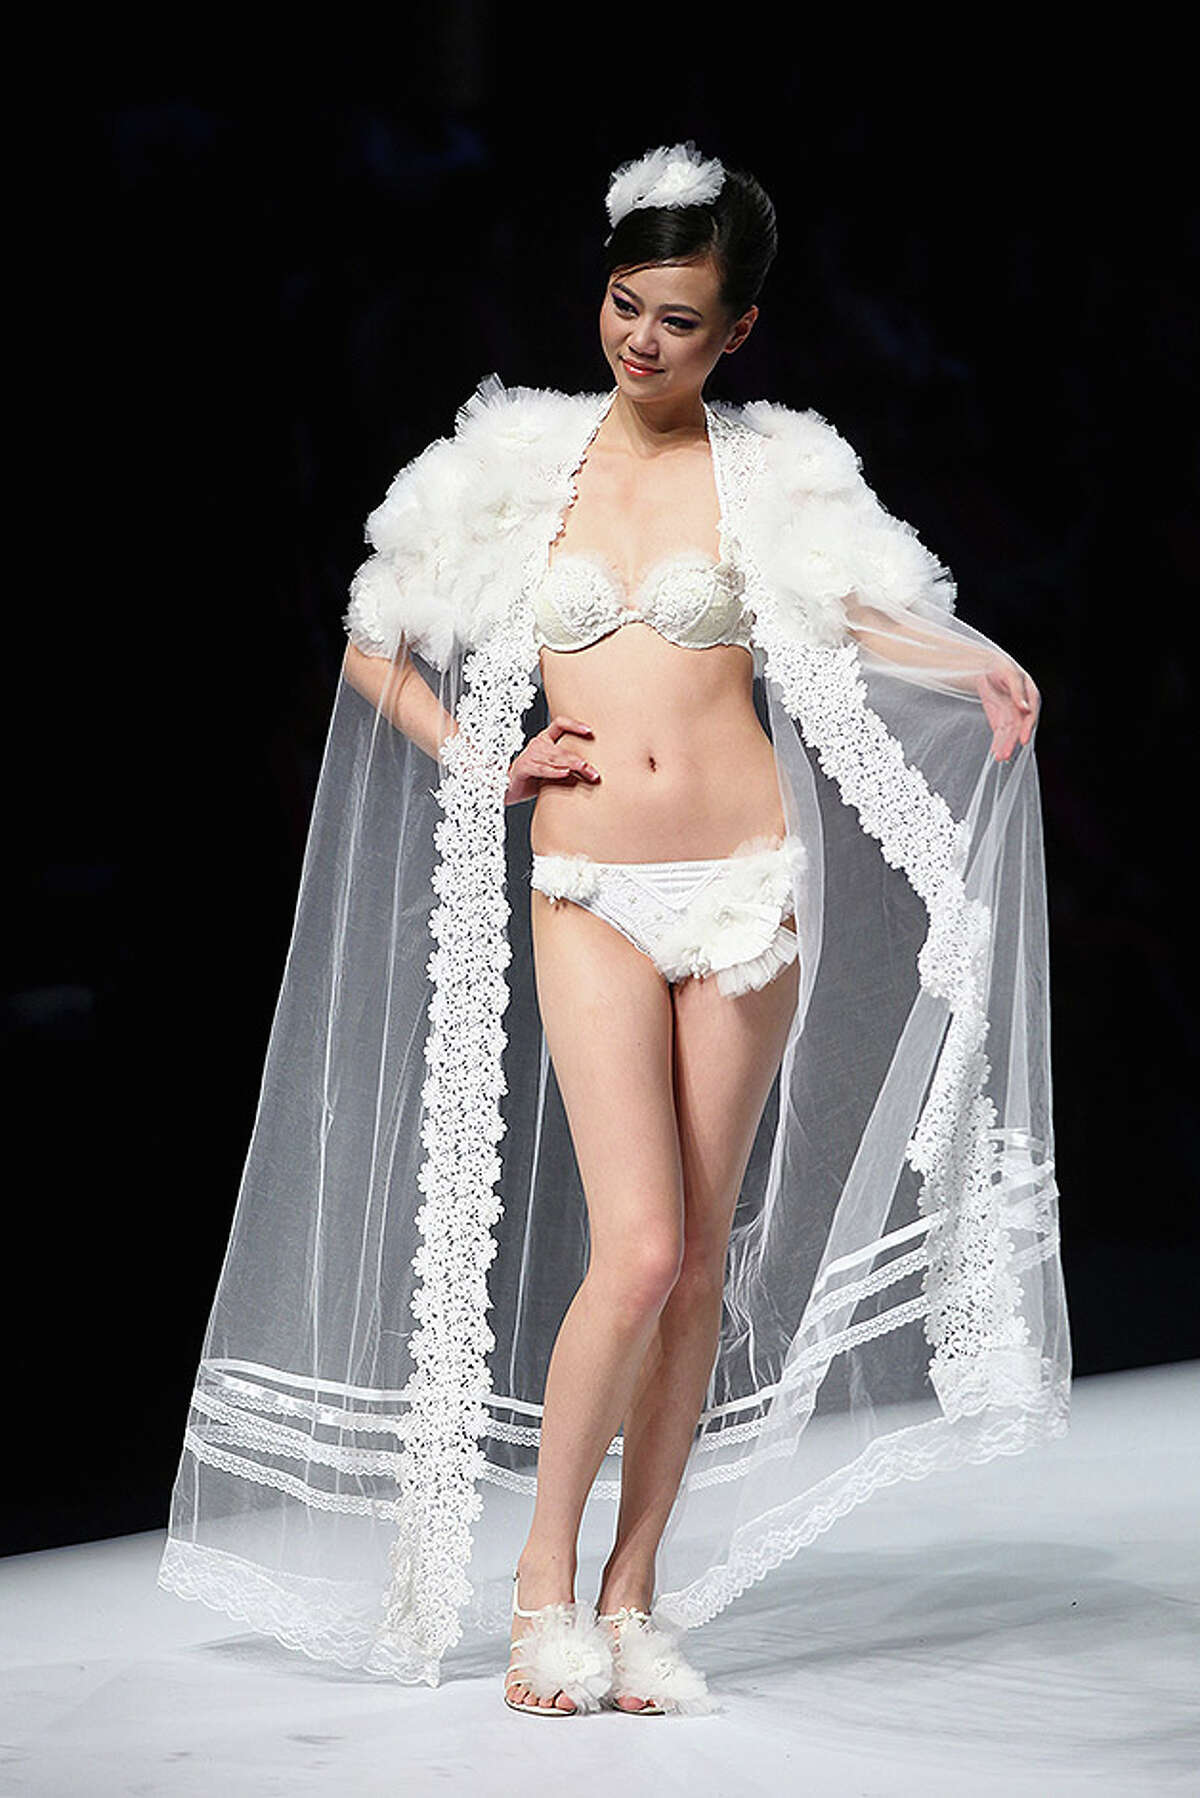 BEIJING - OCTOBER 28: A model walks the runway during Ordifen Cup China Lingerie Design Contest 2010 at China Fashion Week Spring/Summer 2011 on October 28, 2010 in Beijing, China. (Photo by Feng Li/Getty Images)